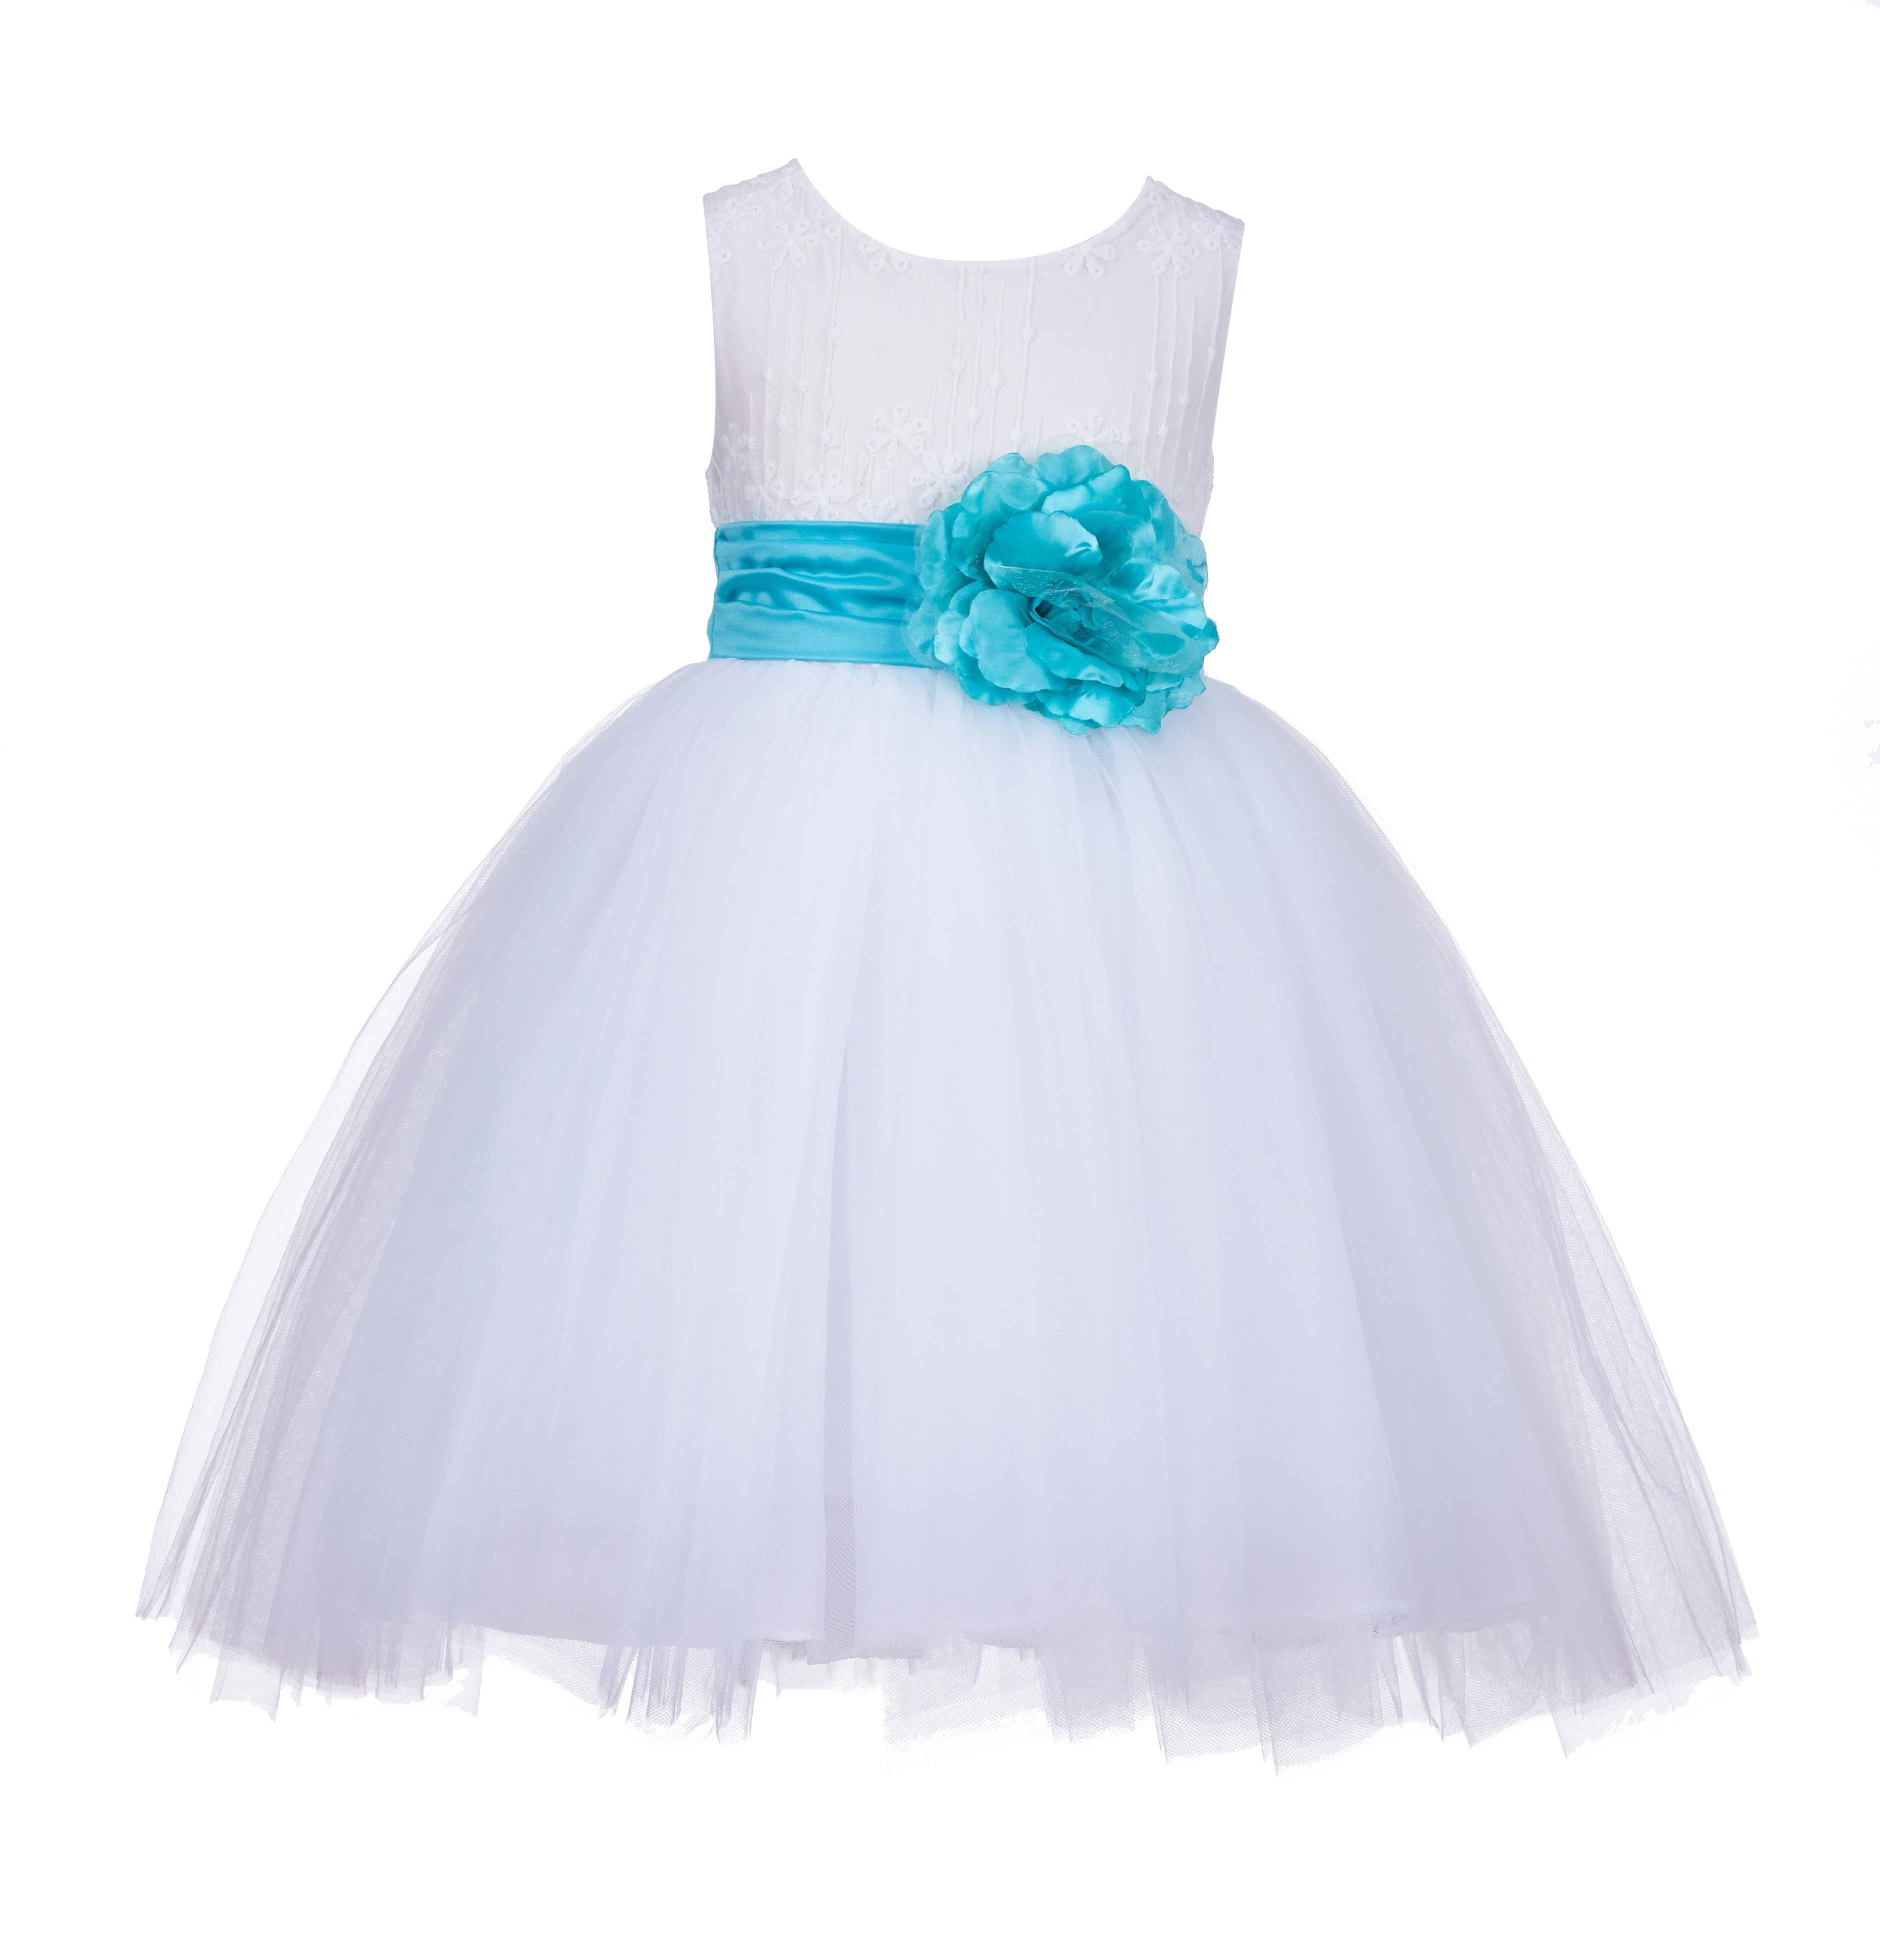 White/Tiffany Lace Embroidery Tulle Flower Girl Dress Wedding 118